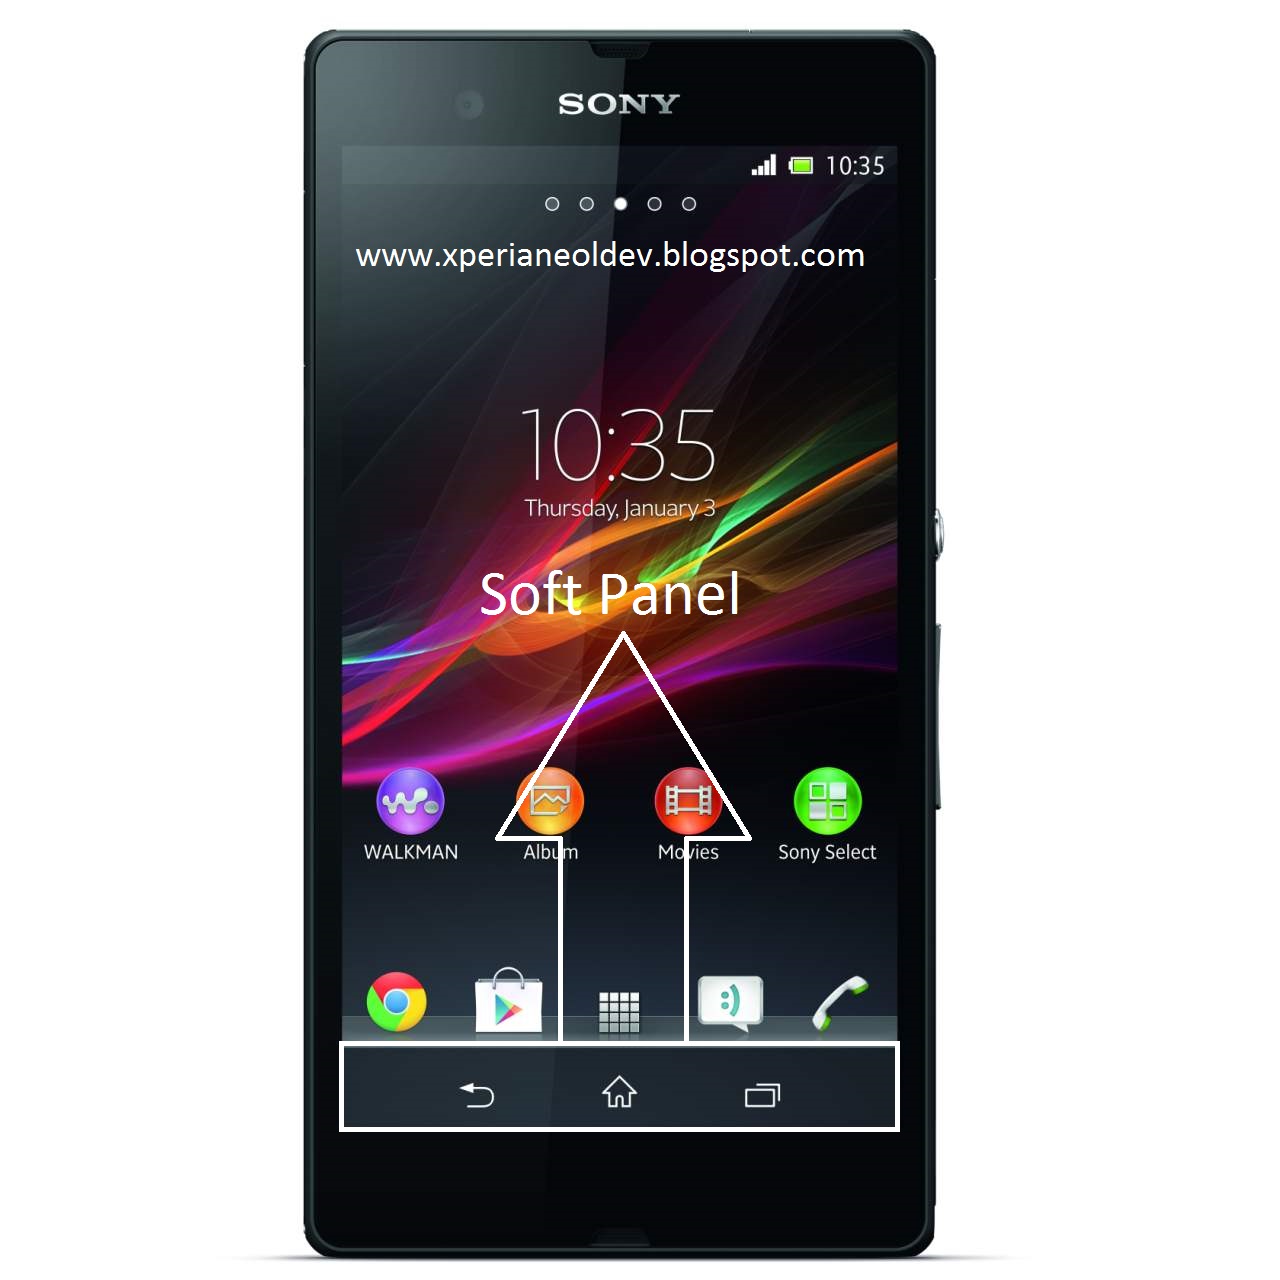 ... Smartphones are coming with soft panel but it is not in Xperia neo L